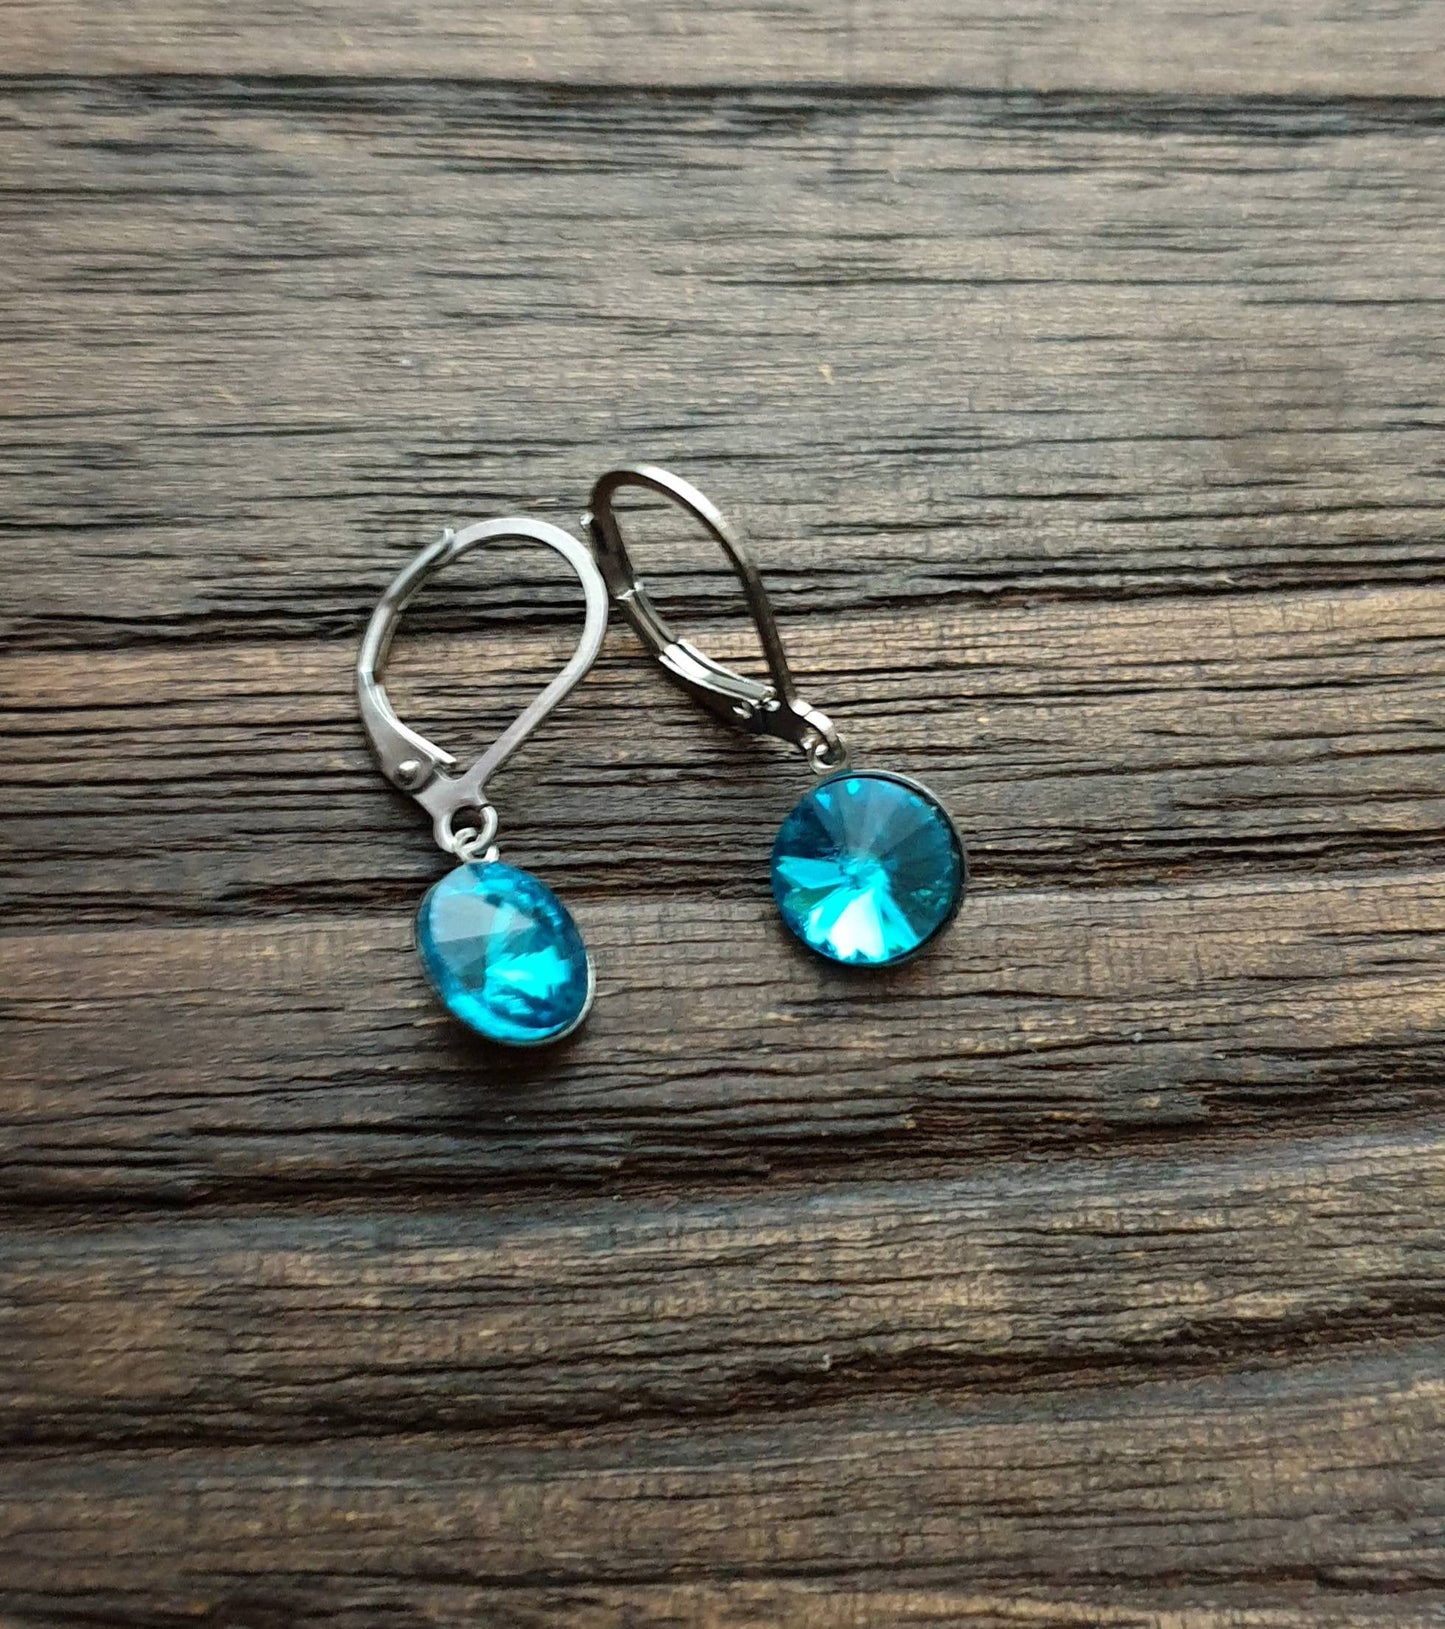 Glass Crystal Leverback Earrings Stainless Steel. Choose colour: Clear, Rainbow, Aquamarine, Light Blue 8mm